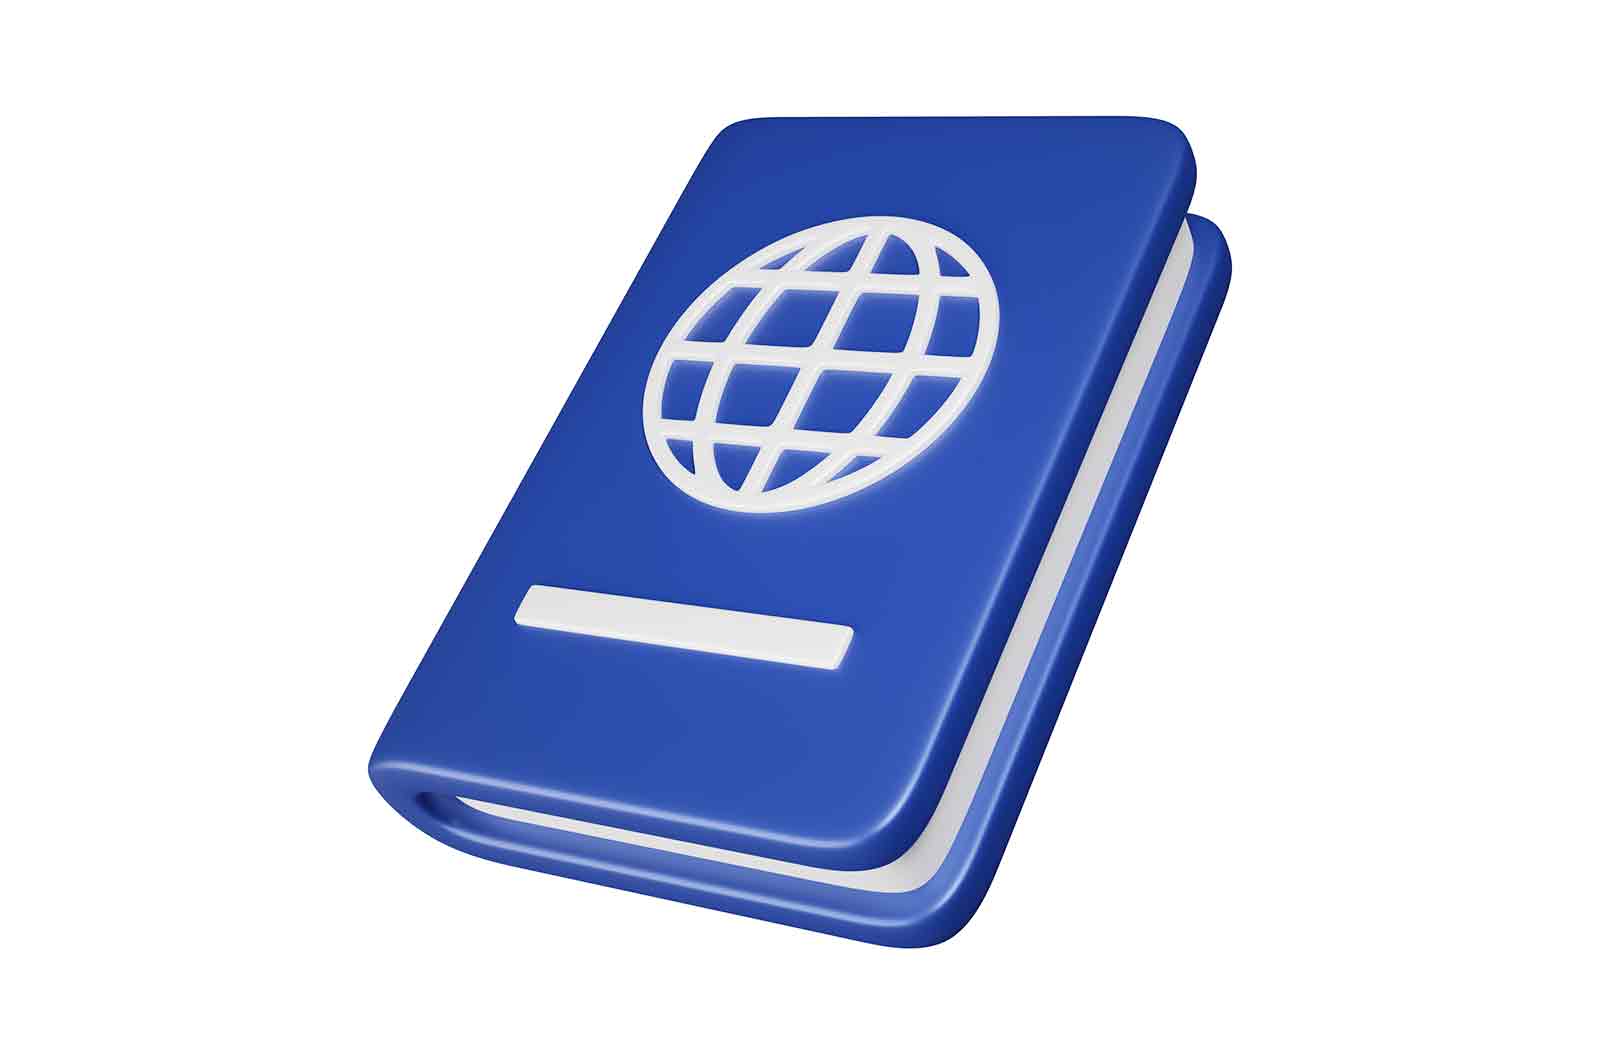 Passport, official identity document 3d rendered icon illustration. Travel, tourism and immigration. International pass